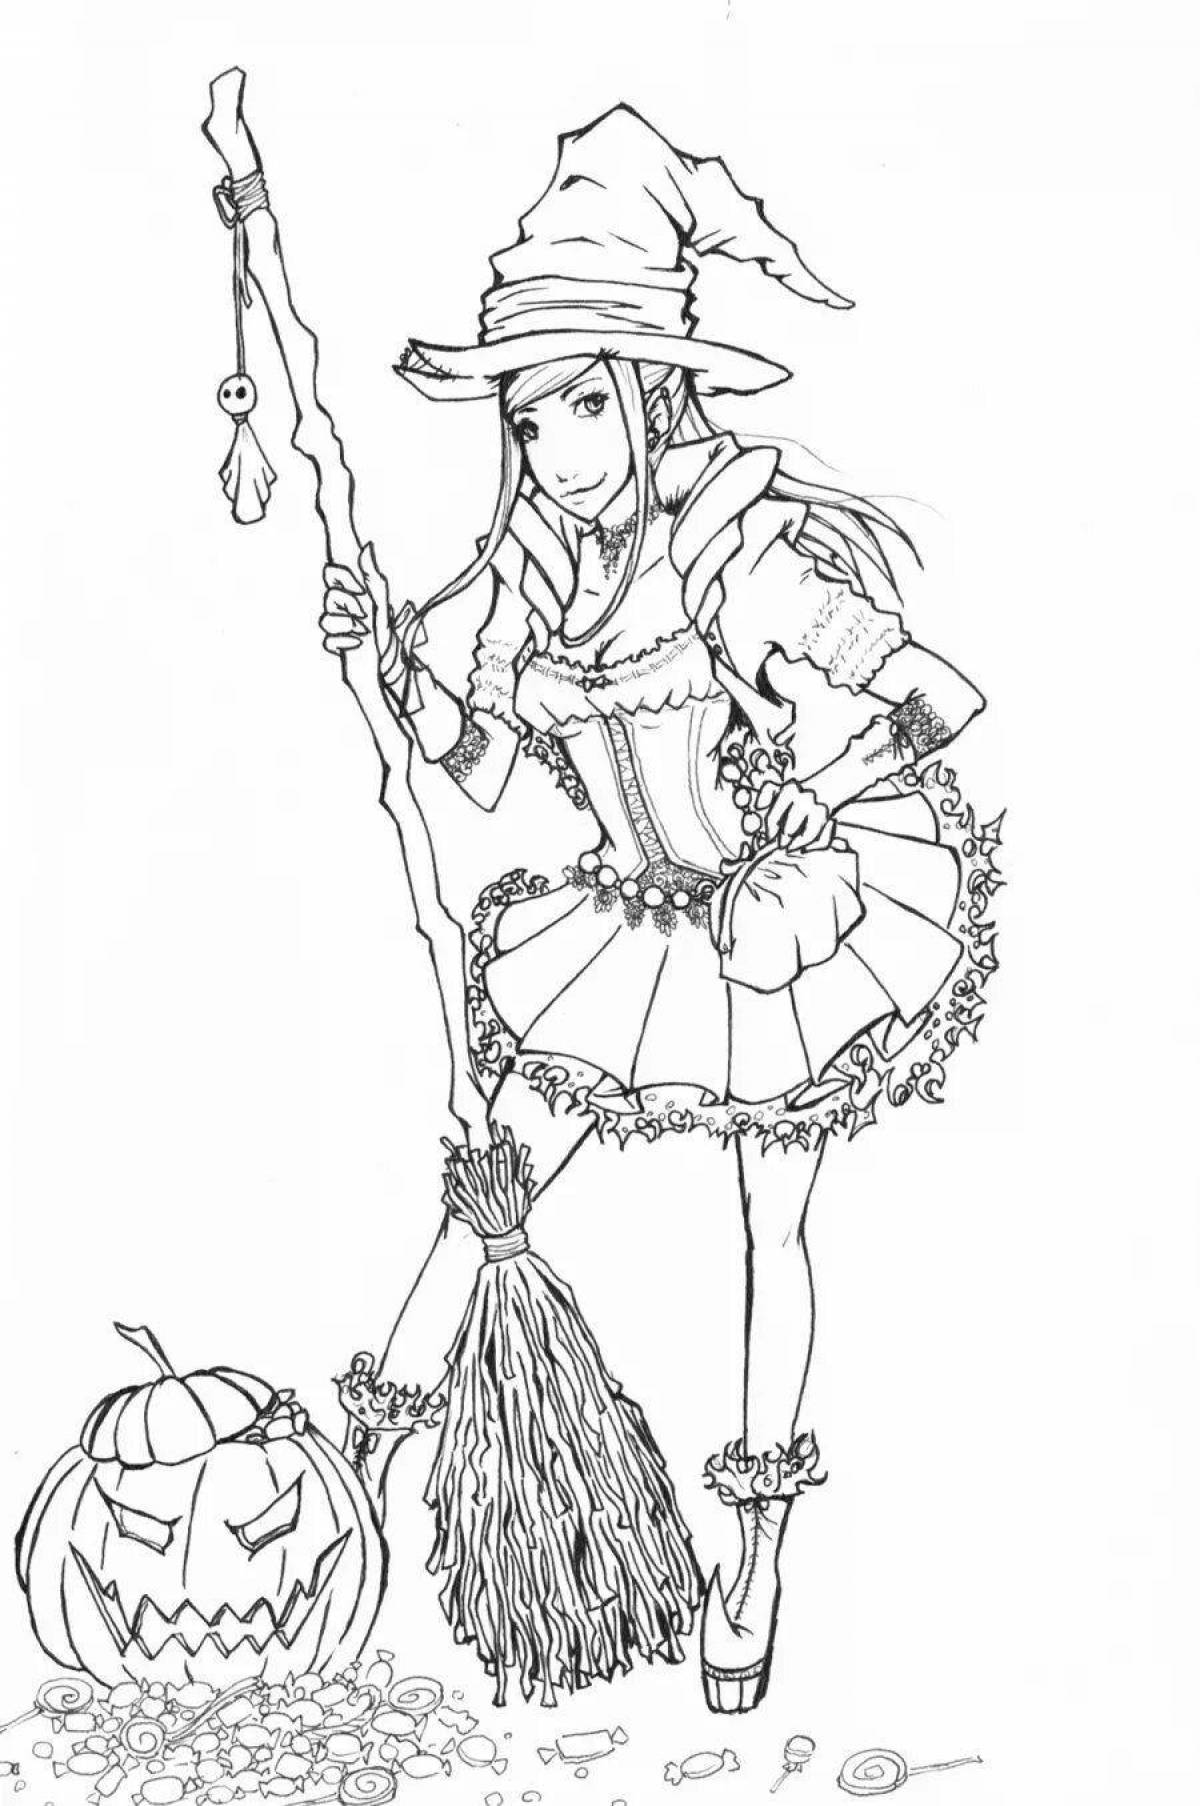 Anime witch infected with witch coloring book